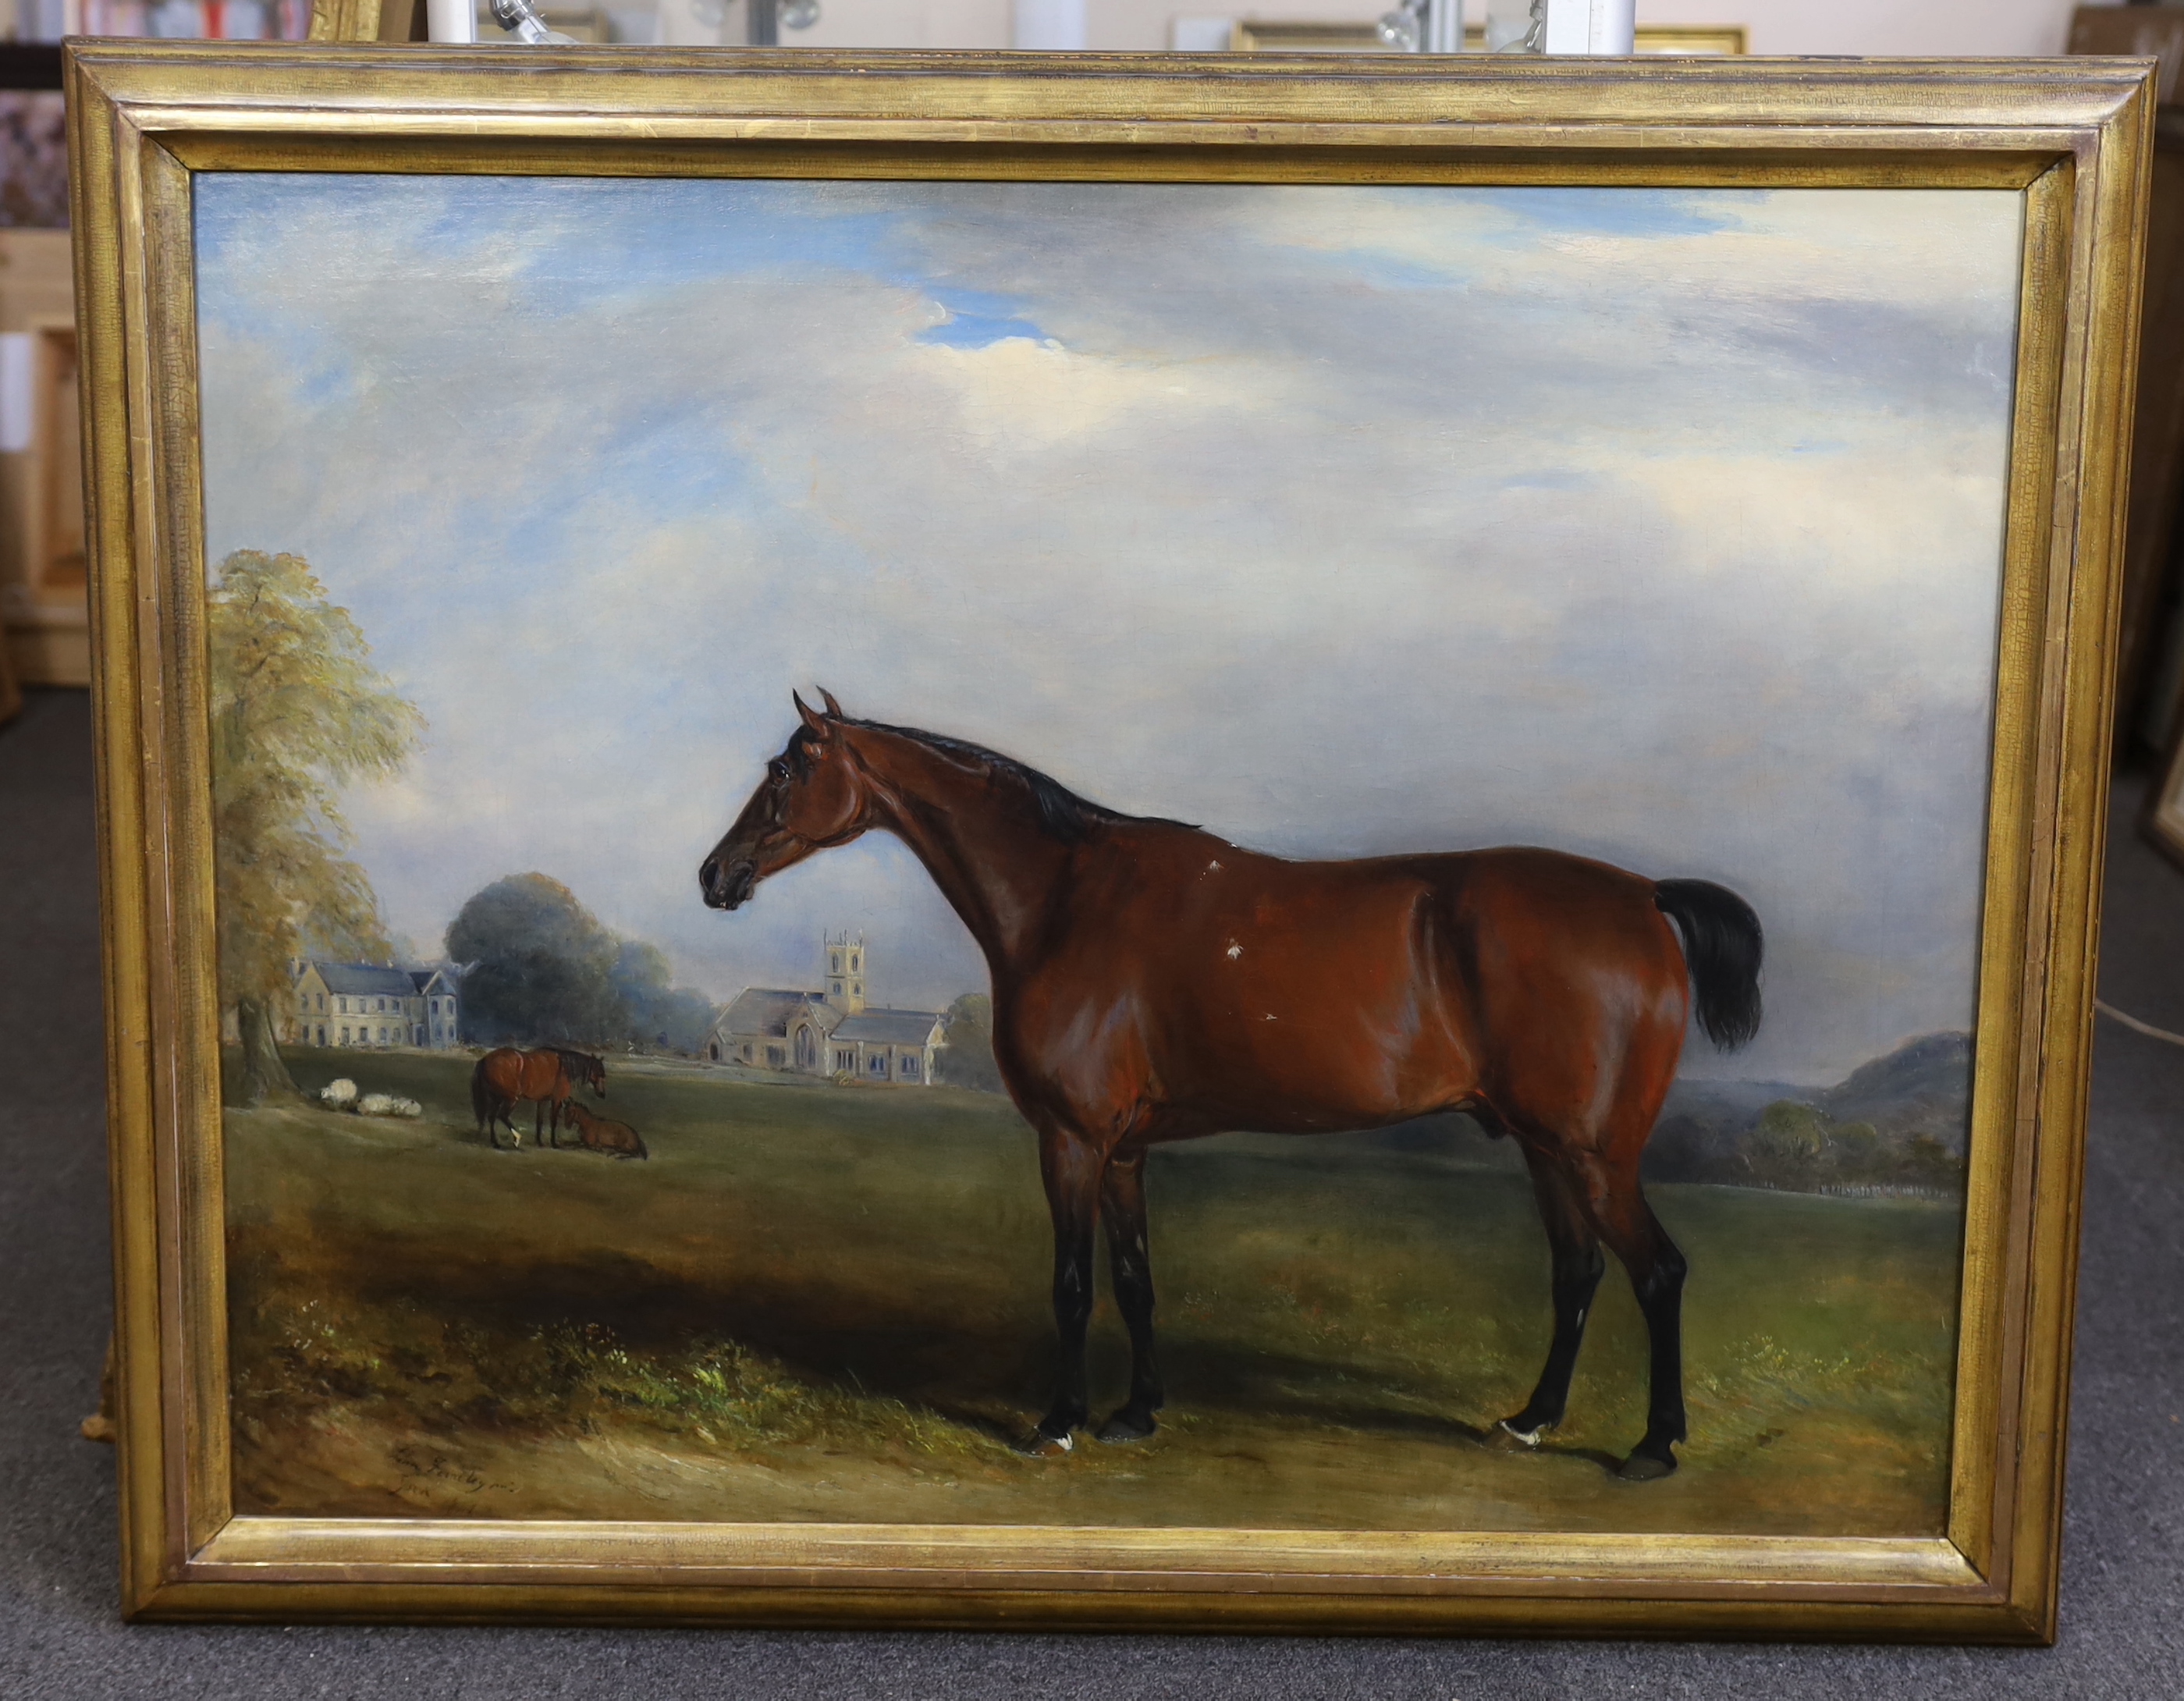 John E. Ferneley Jnr (British, 1815-1862), Portrait of a bay horse in a landscape, a church and country house beyond, oil on canvas, 70 x 90cm